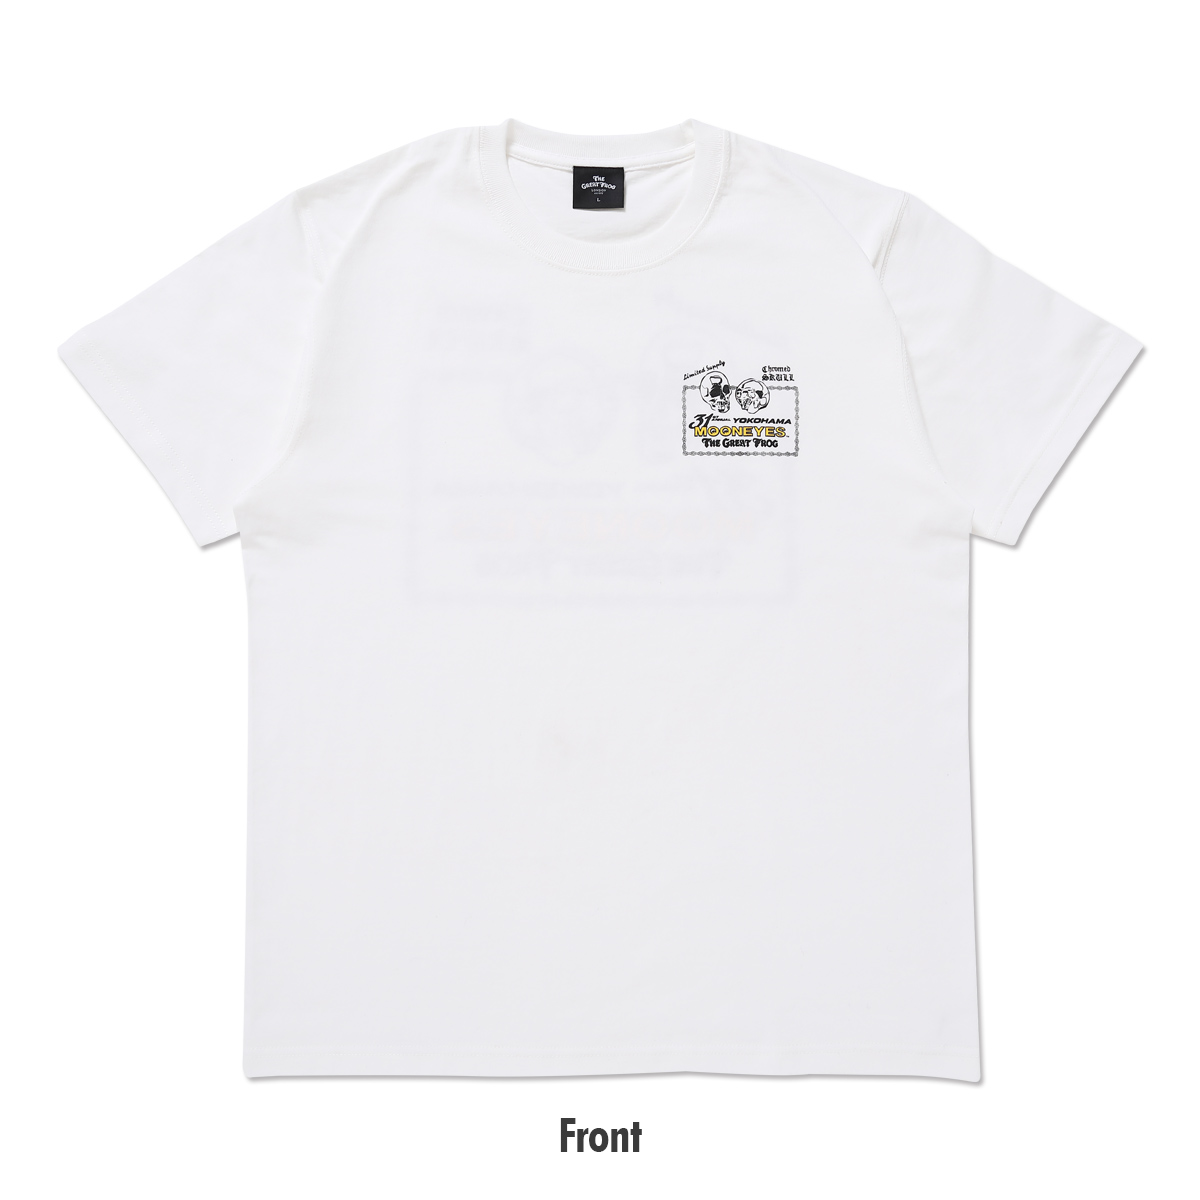 The Great Frog x MOON T-shirt (White)